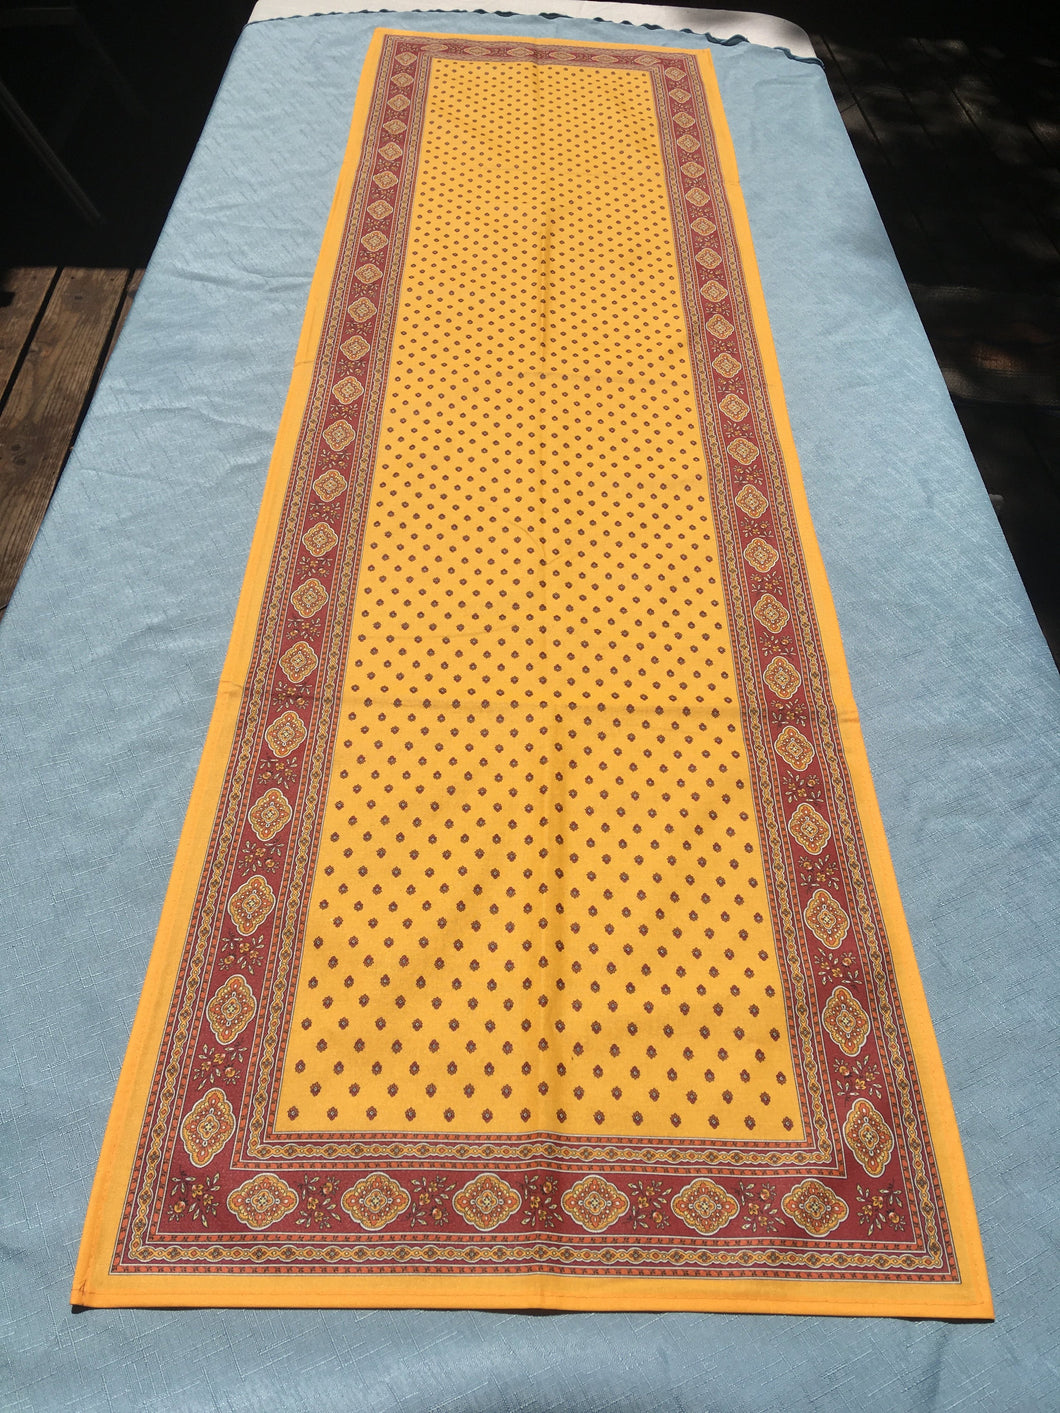 Acrylic coating allows for universal wipe clean finish, allowing for liquids and oils to bead off. Measures 16.5 by 60 in. Pictured on a 72 inch length table for reference, but may be draped over the sides of a smaller table as well. Manufactured by l'Ensoillade and made in France. Pictured in safran yellow with deep red accents.